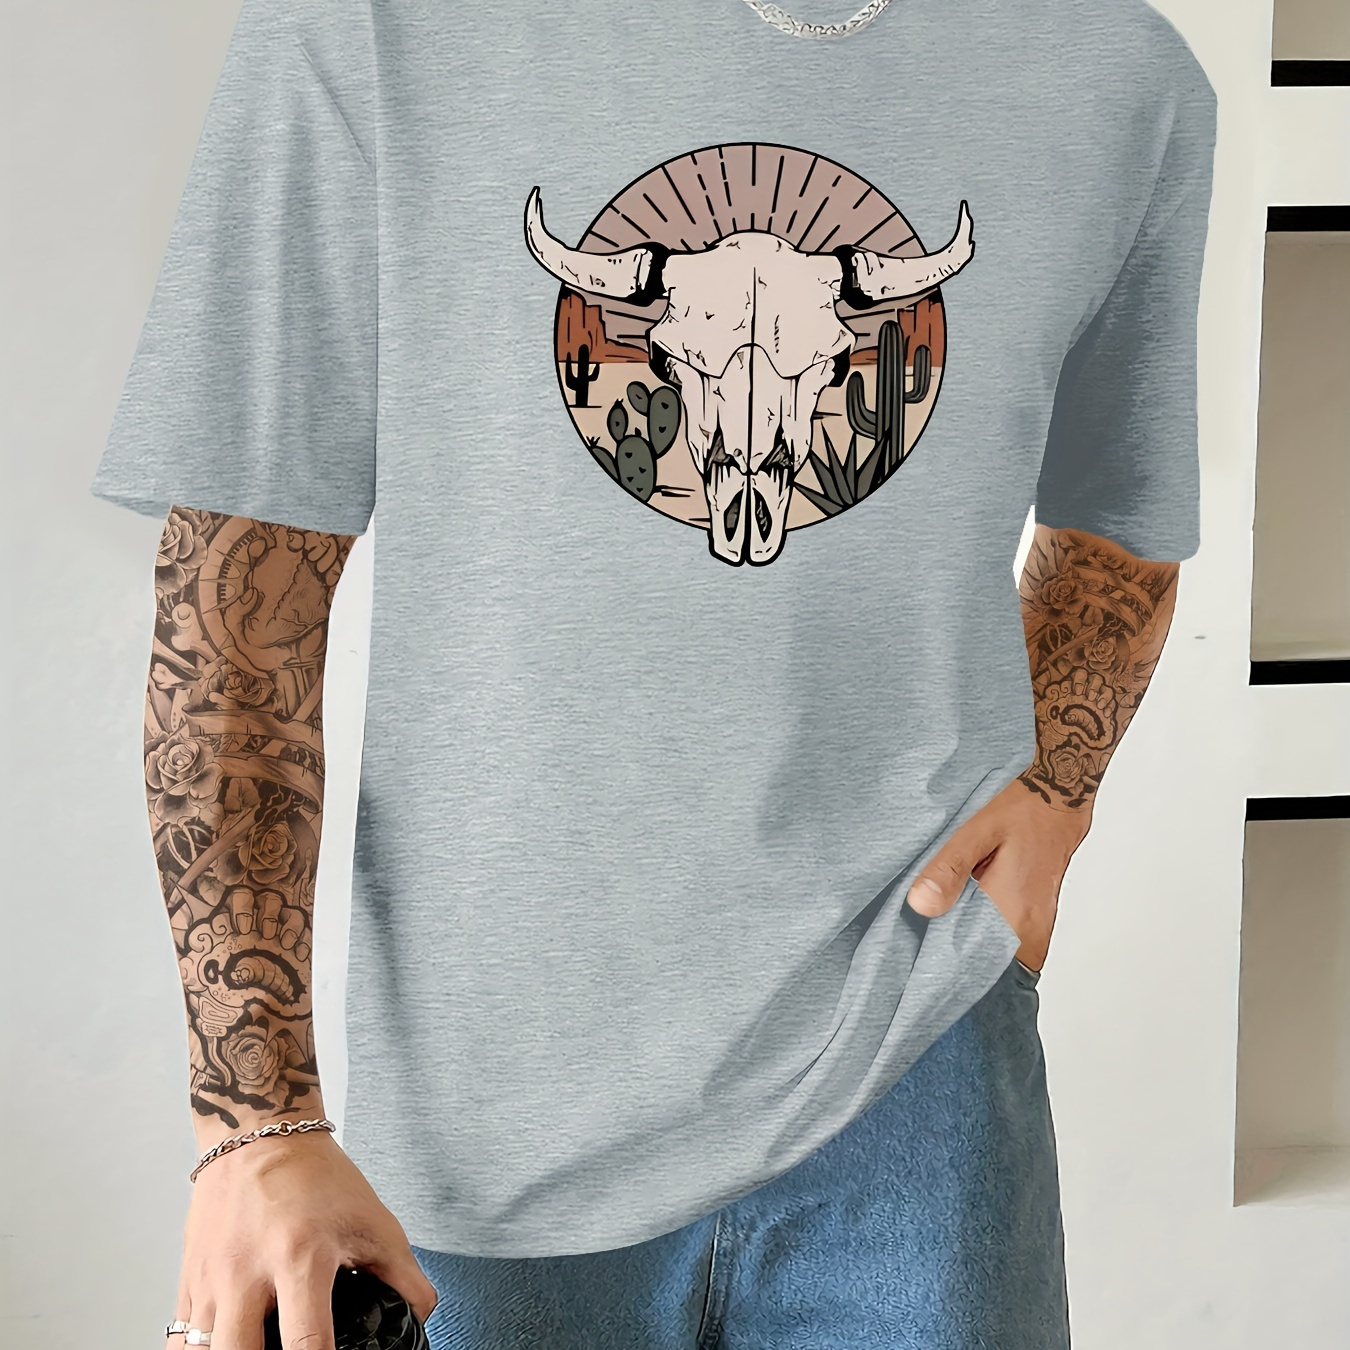 

Wild West Bull Graphic Print Men's Creative Top, Casual Short Sleeve Crew Neck T-shirt, Men's Clothing For Summer Outdoor